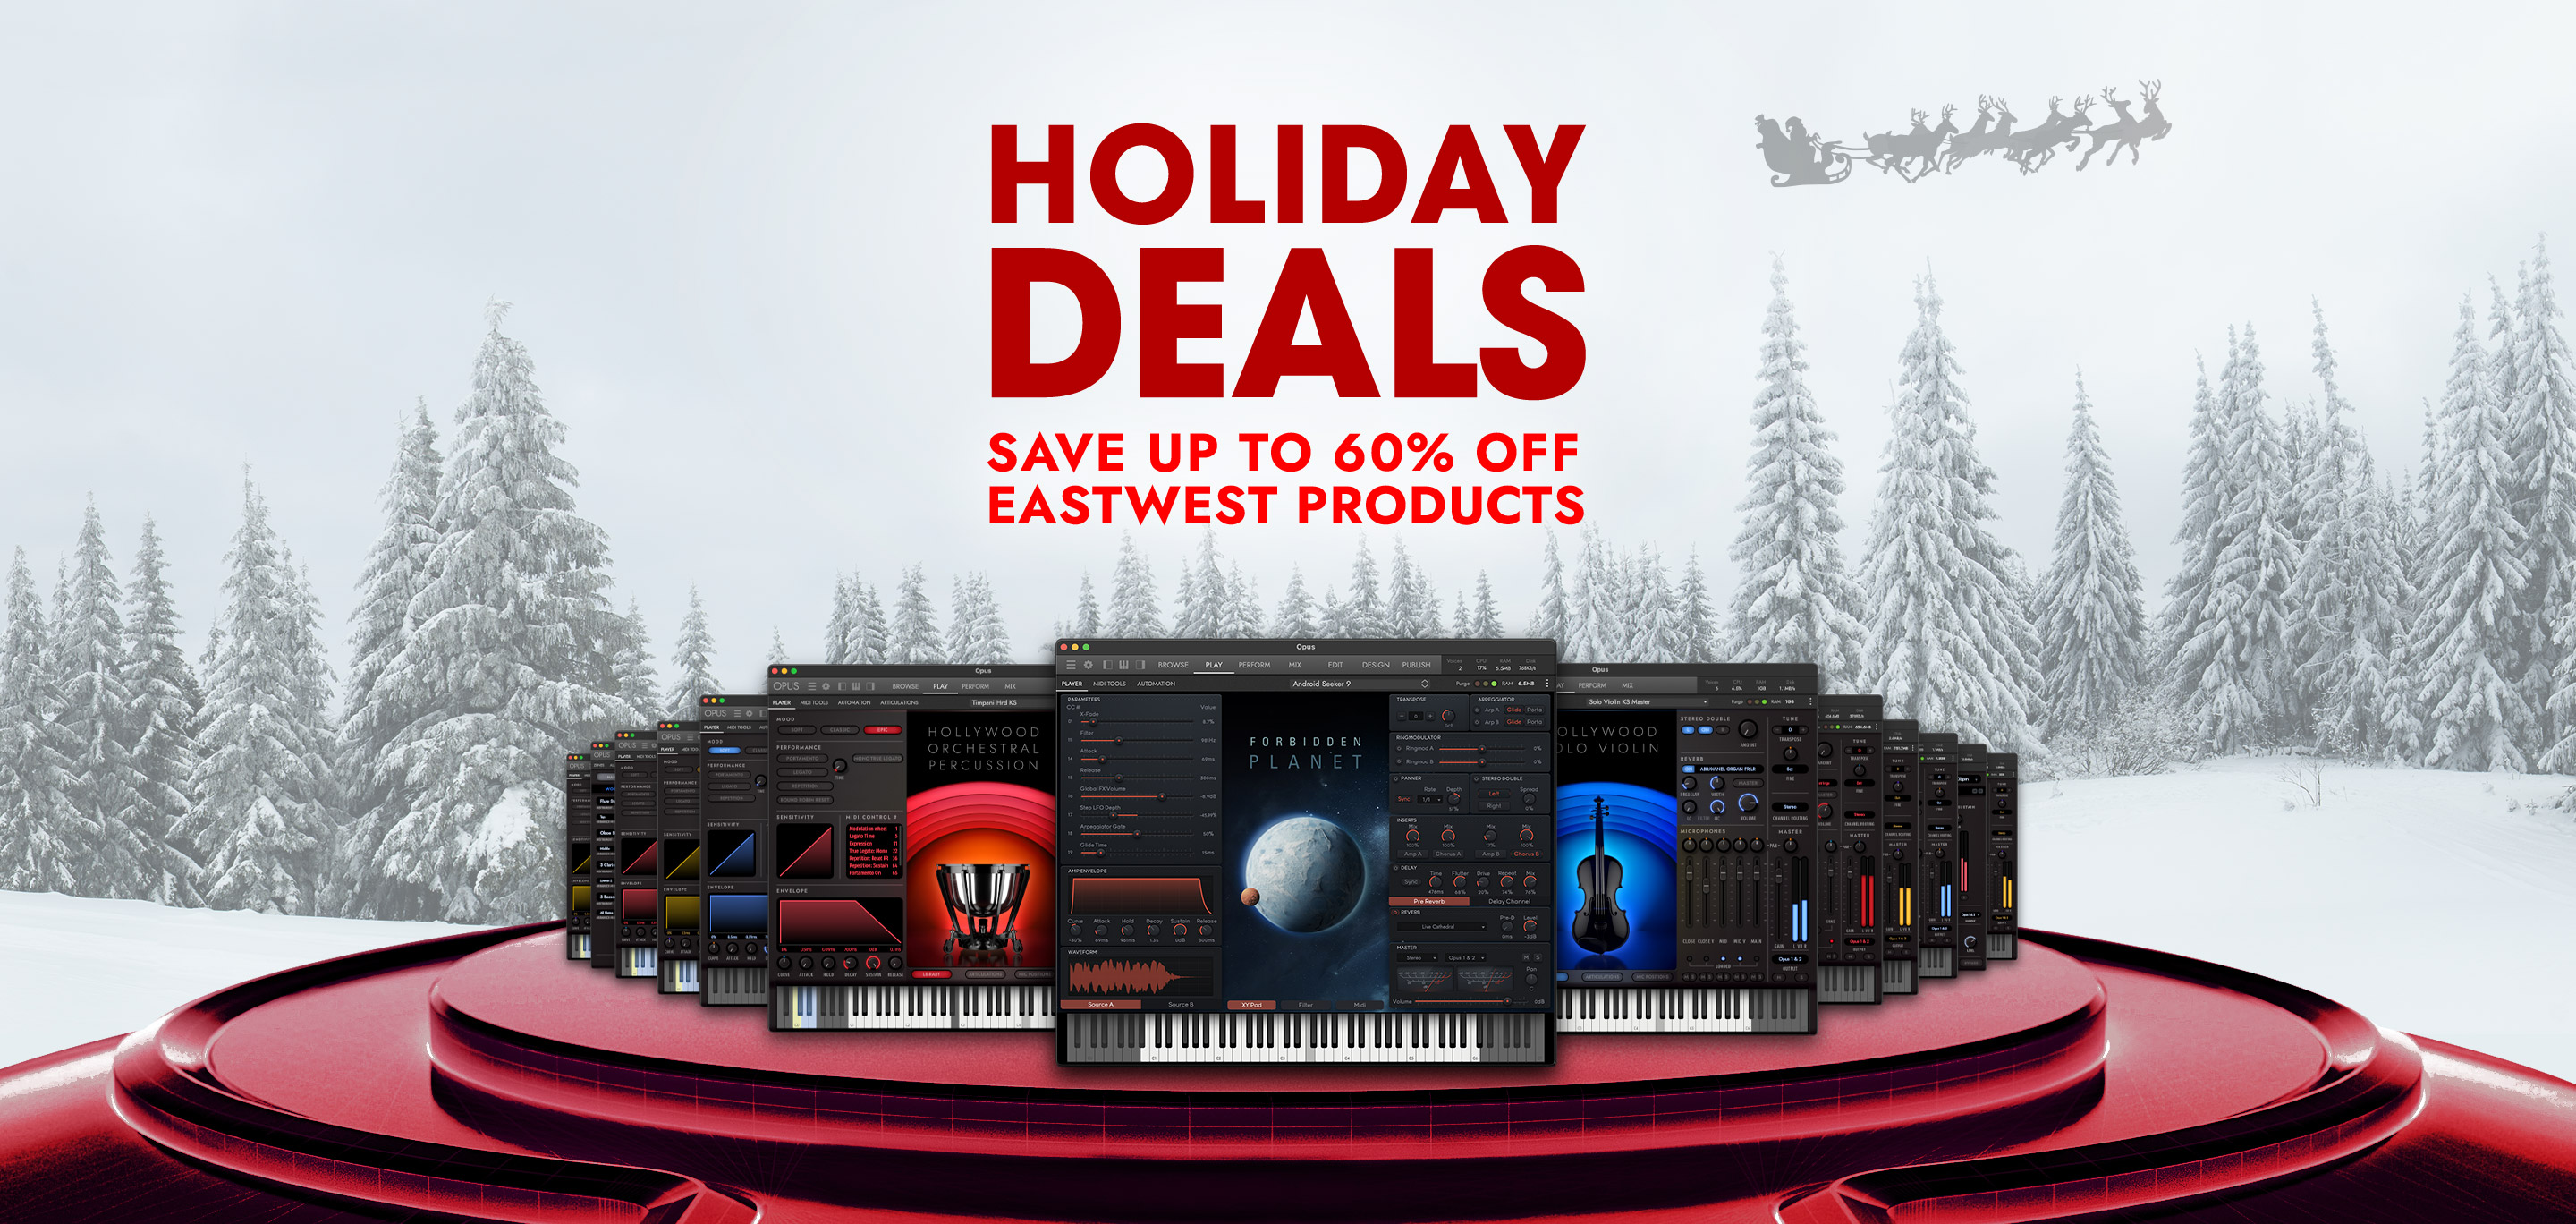 EastWest Holiday Deals - Save up to 60% off